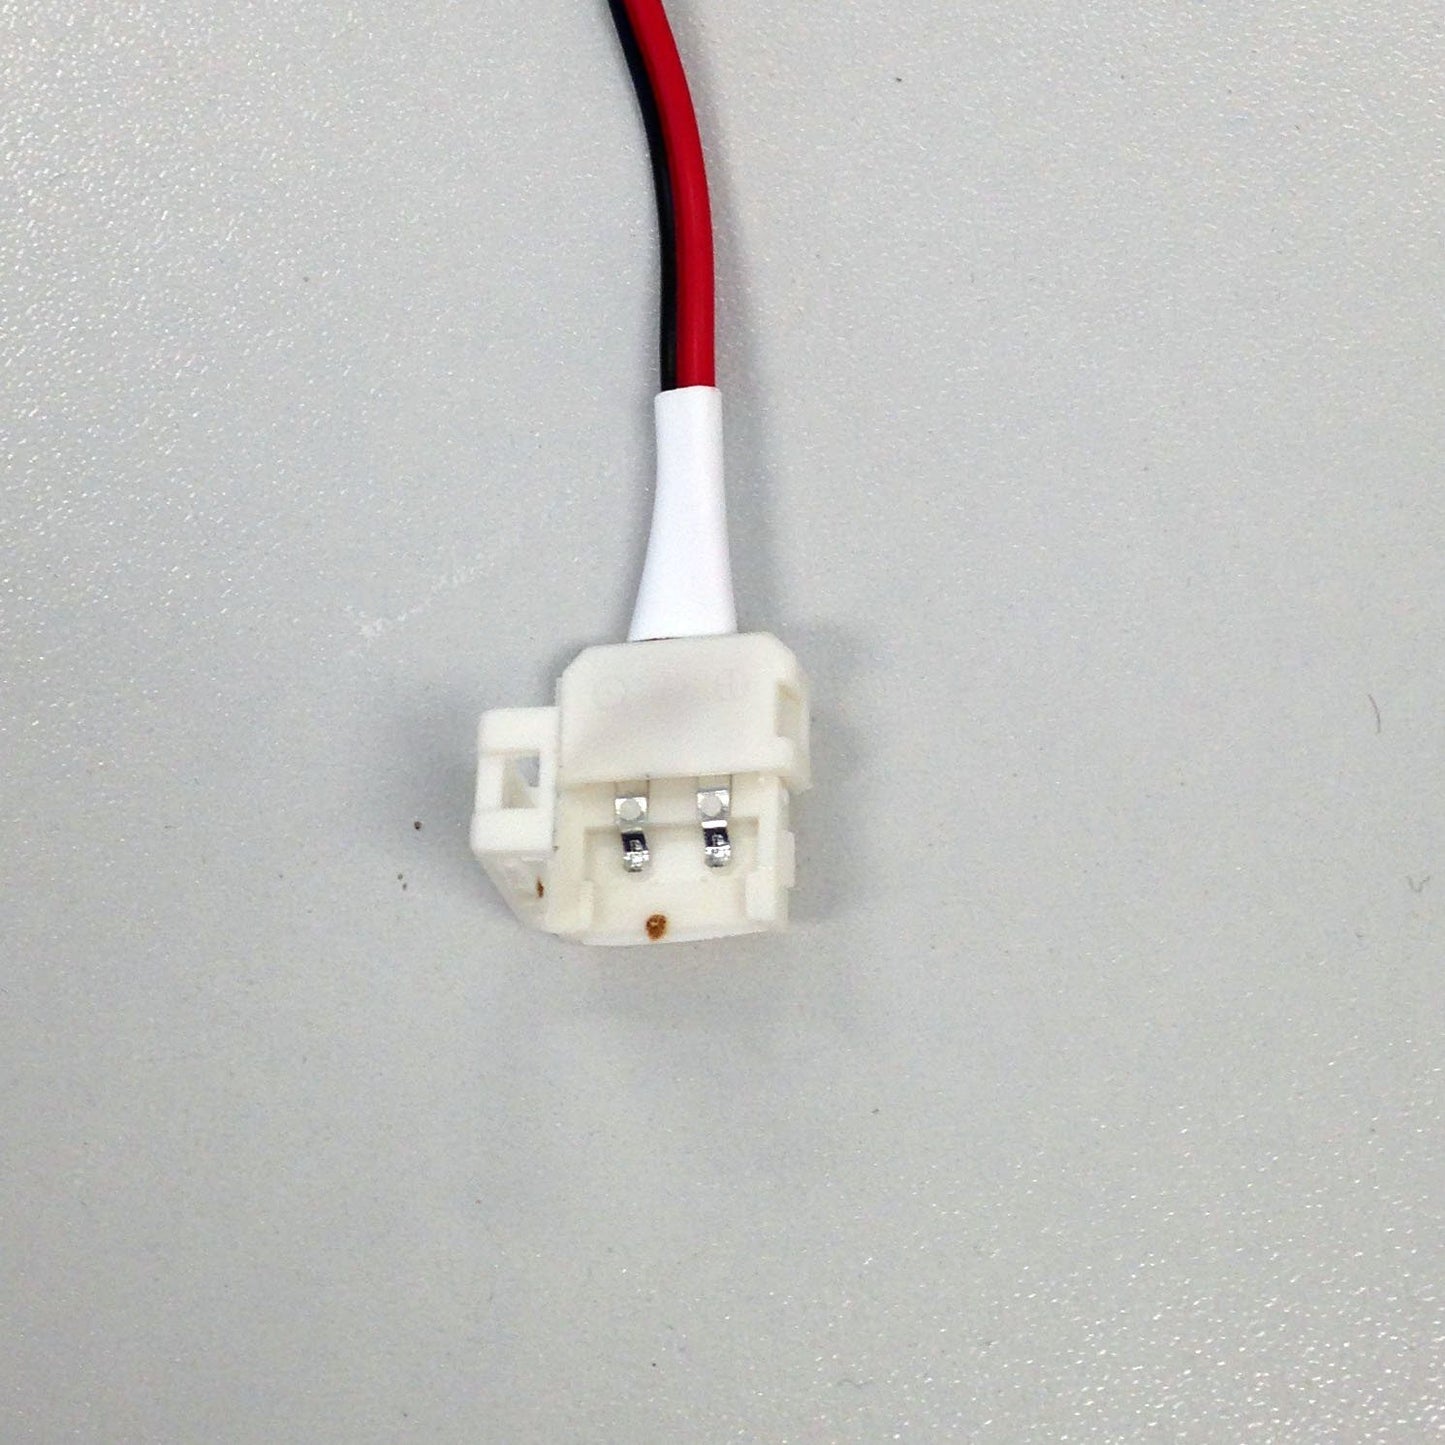 led wire splice connector with red and black wire and open clip on end